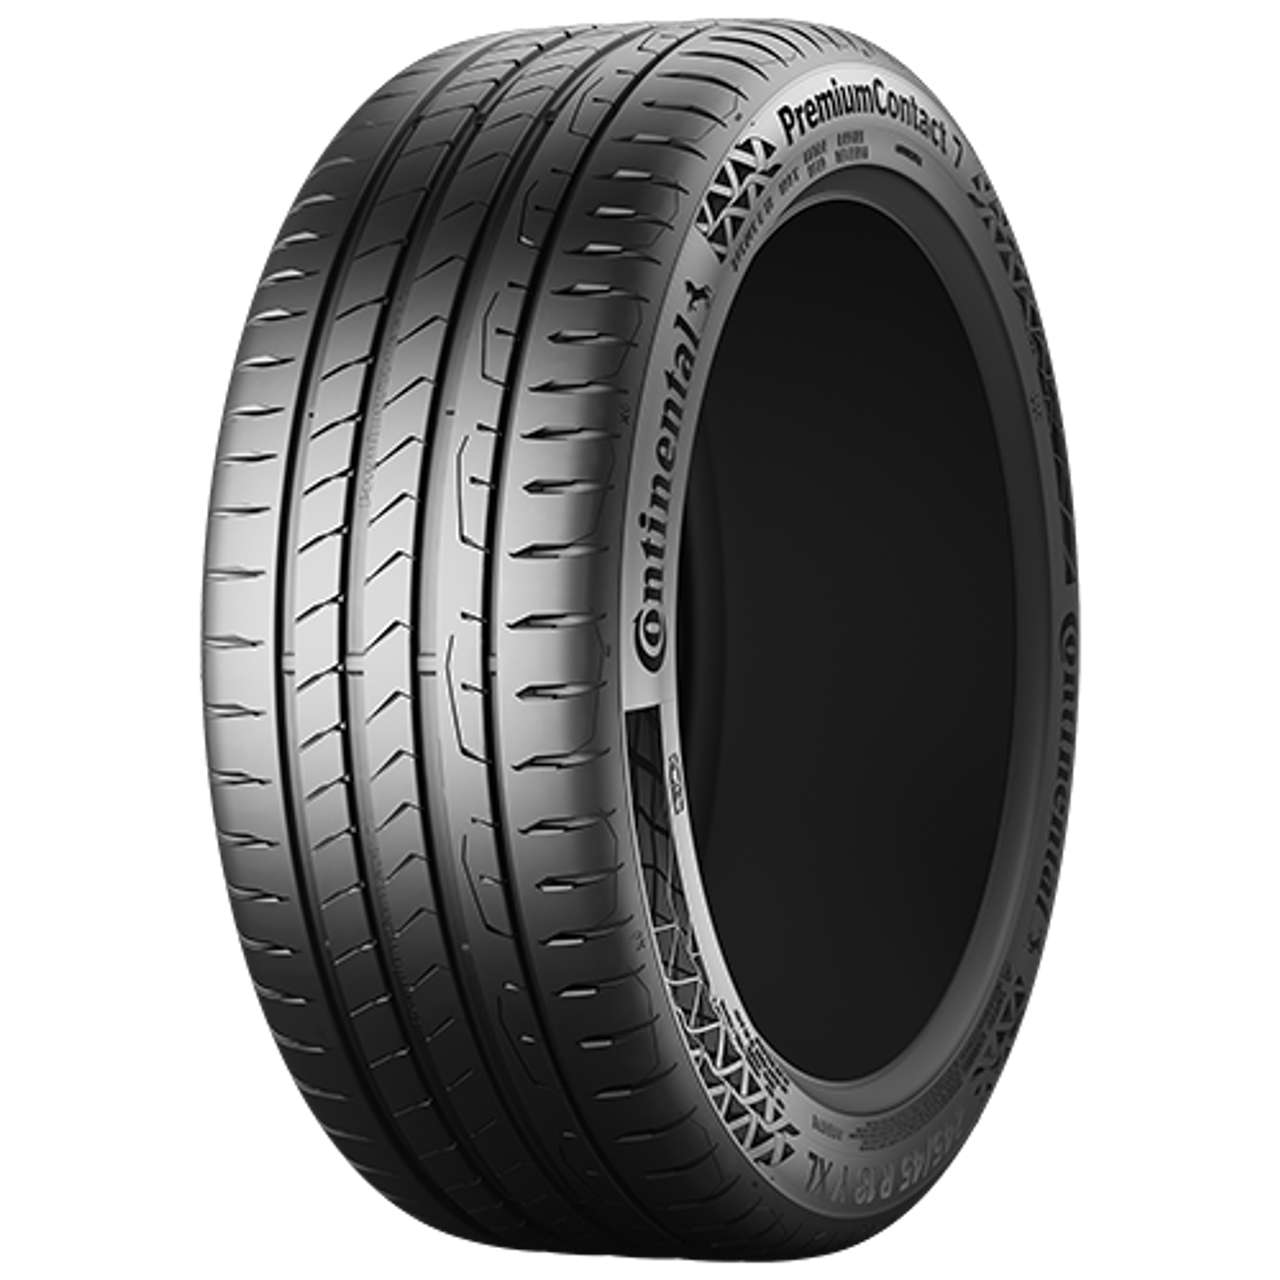 CONTINENTAL PREMIUMCONTACT 7 (EVc) 205/55R17 95W FR BSW